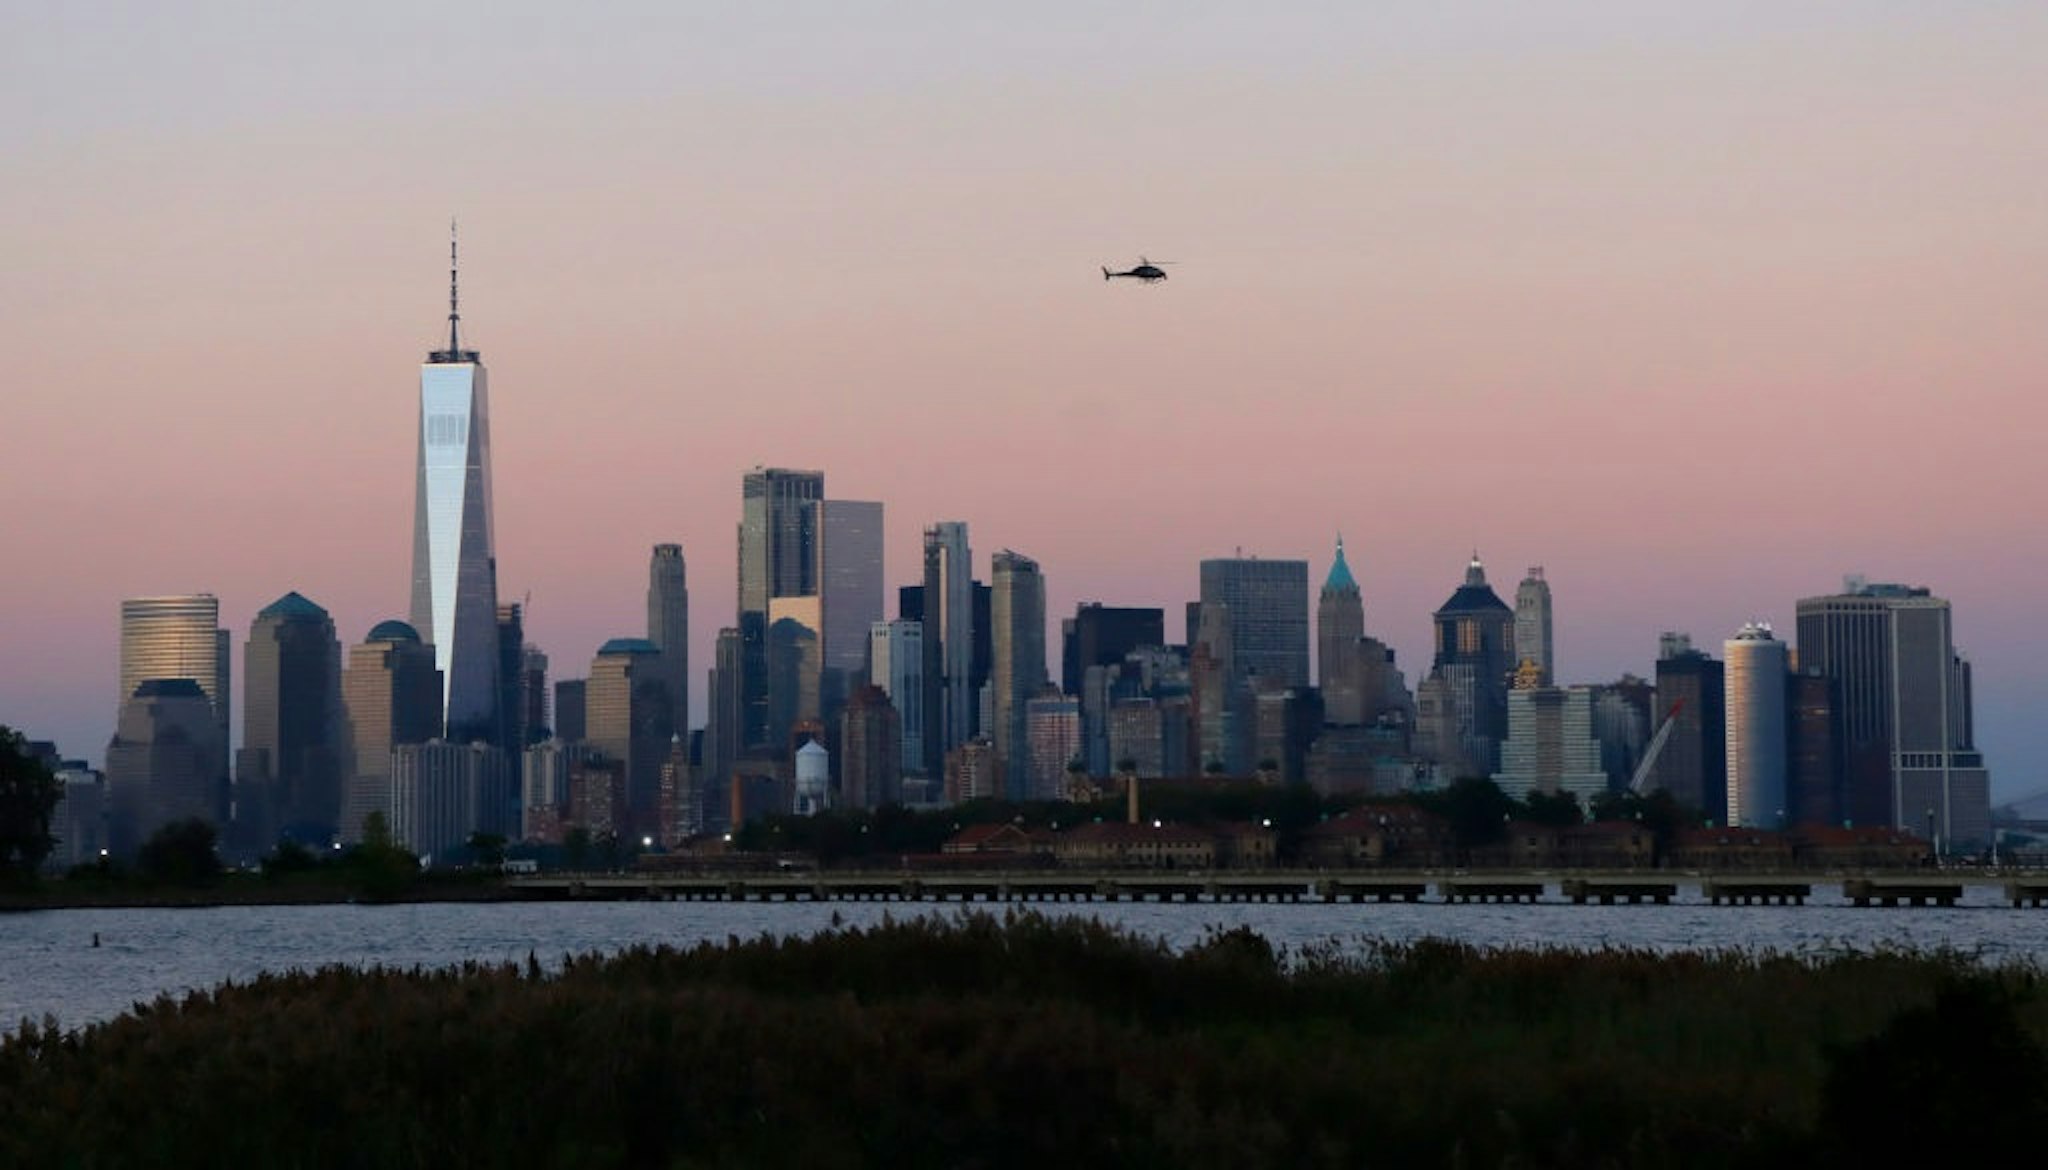 JERSEY CITY, NJ - SEPTEMBER 7: A helicopter flies over the skyline of lower Manhattan and One World Trade Center as the sun sets in New York City on September 7, 2021 as seen from Jersey City, New Jersey.